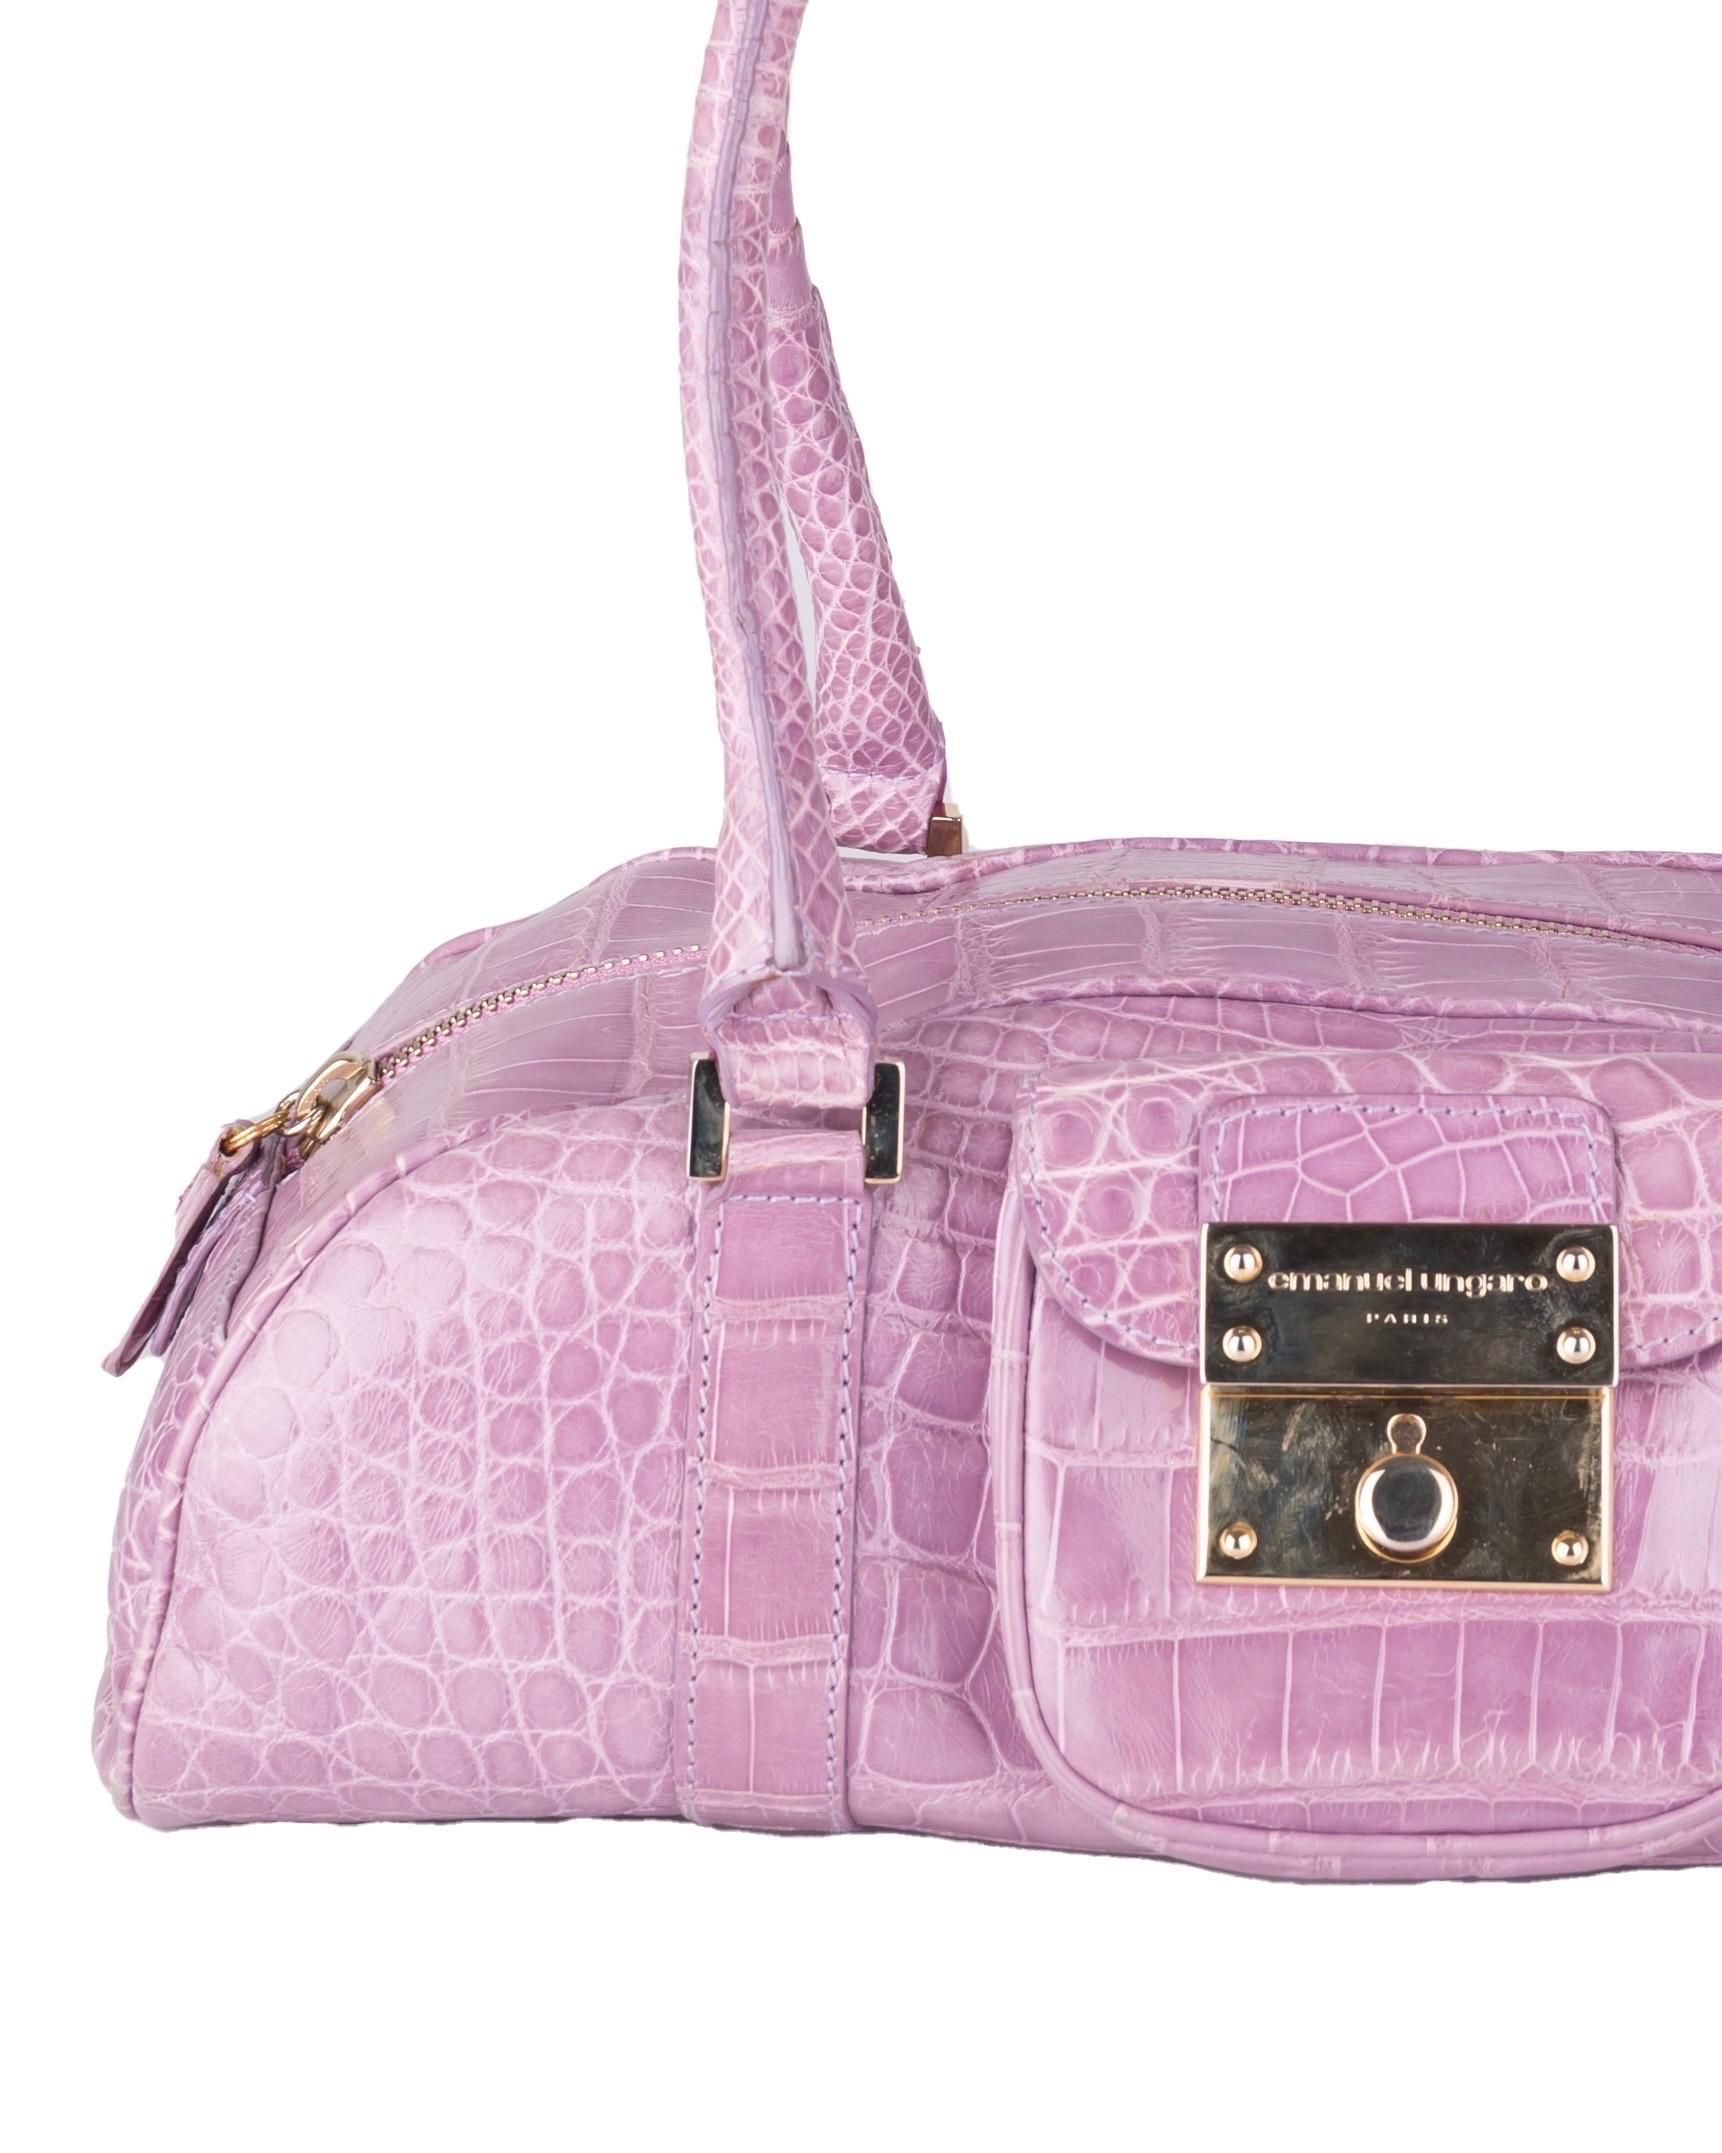 - Emanuel Ungaro by Giambattista Valli
- Sold by Gold Palms Vintage
- Fall/Winter 2004
- Pink croc-embossed leather bag
- Front pocket
- Gold metal hardware